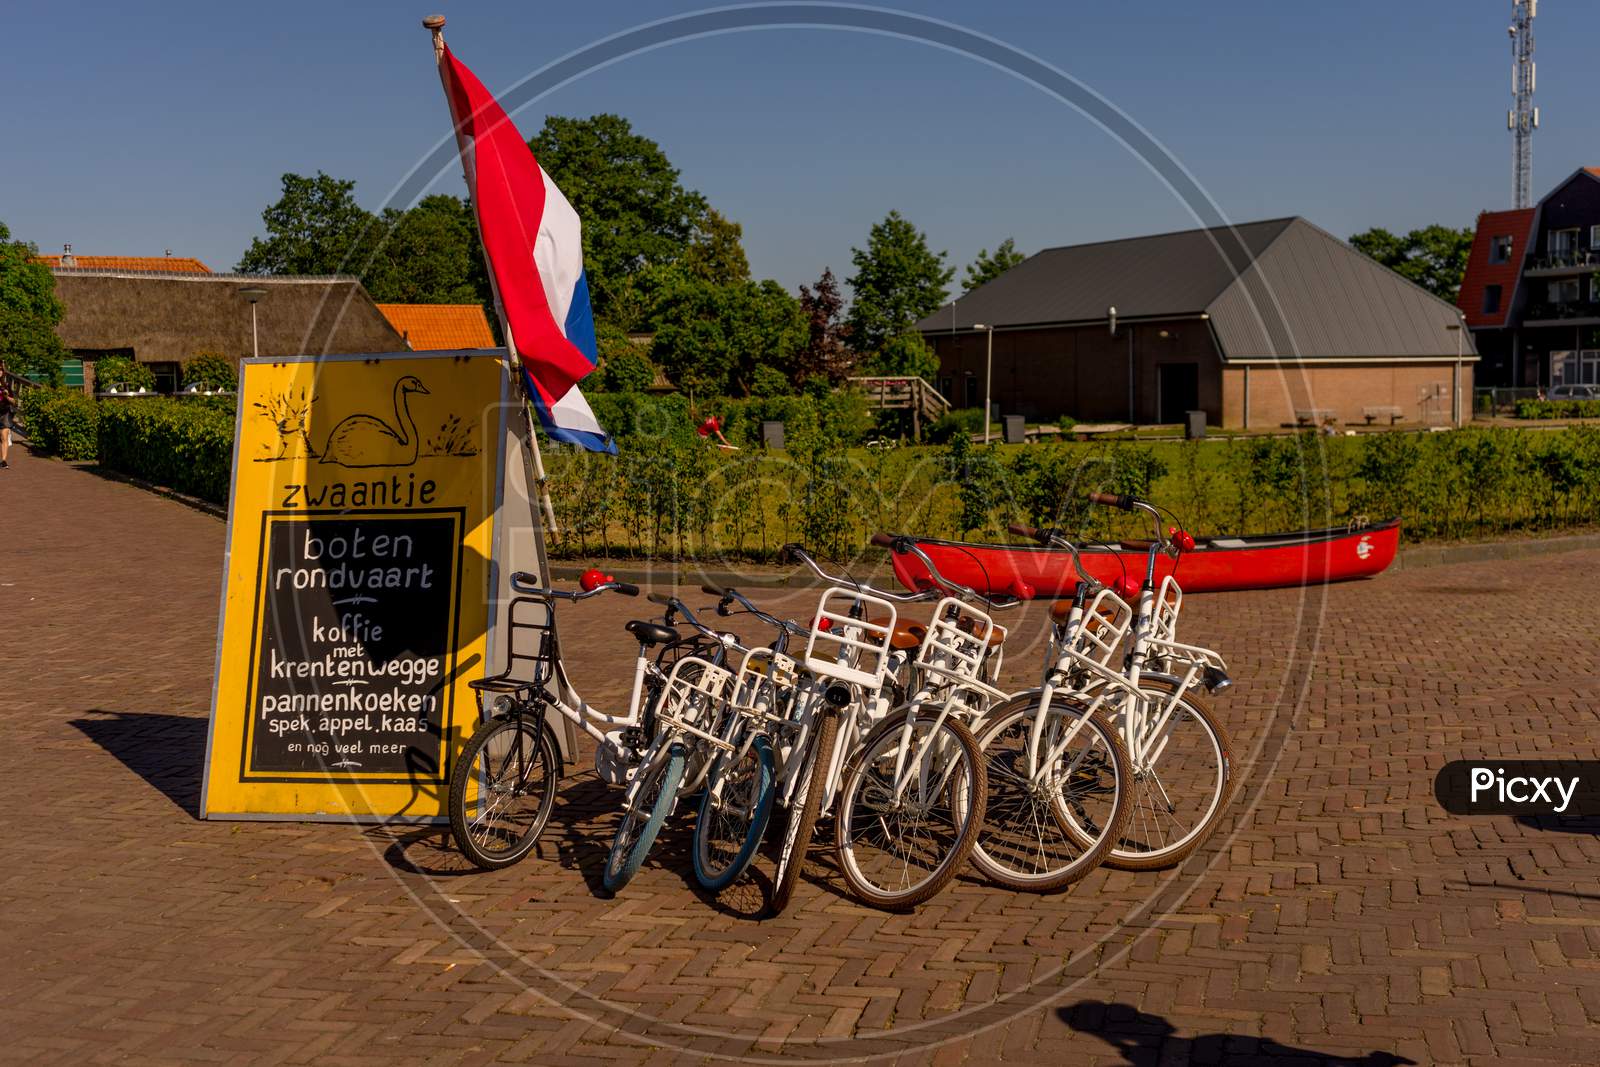 Giethoorn, Netherlands - 26 May: A Tcycle Rental Shop At Giethoorn On 26 May 2017. Giethoorn Is The Venice Of Netherlands